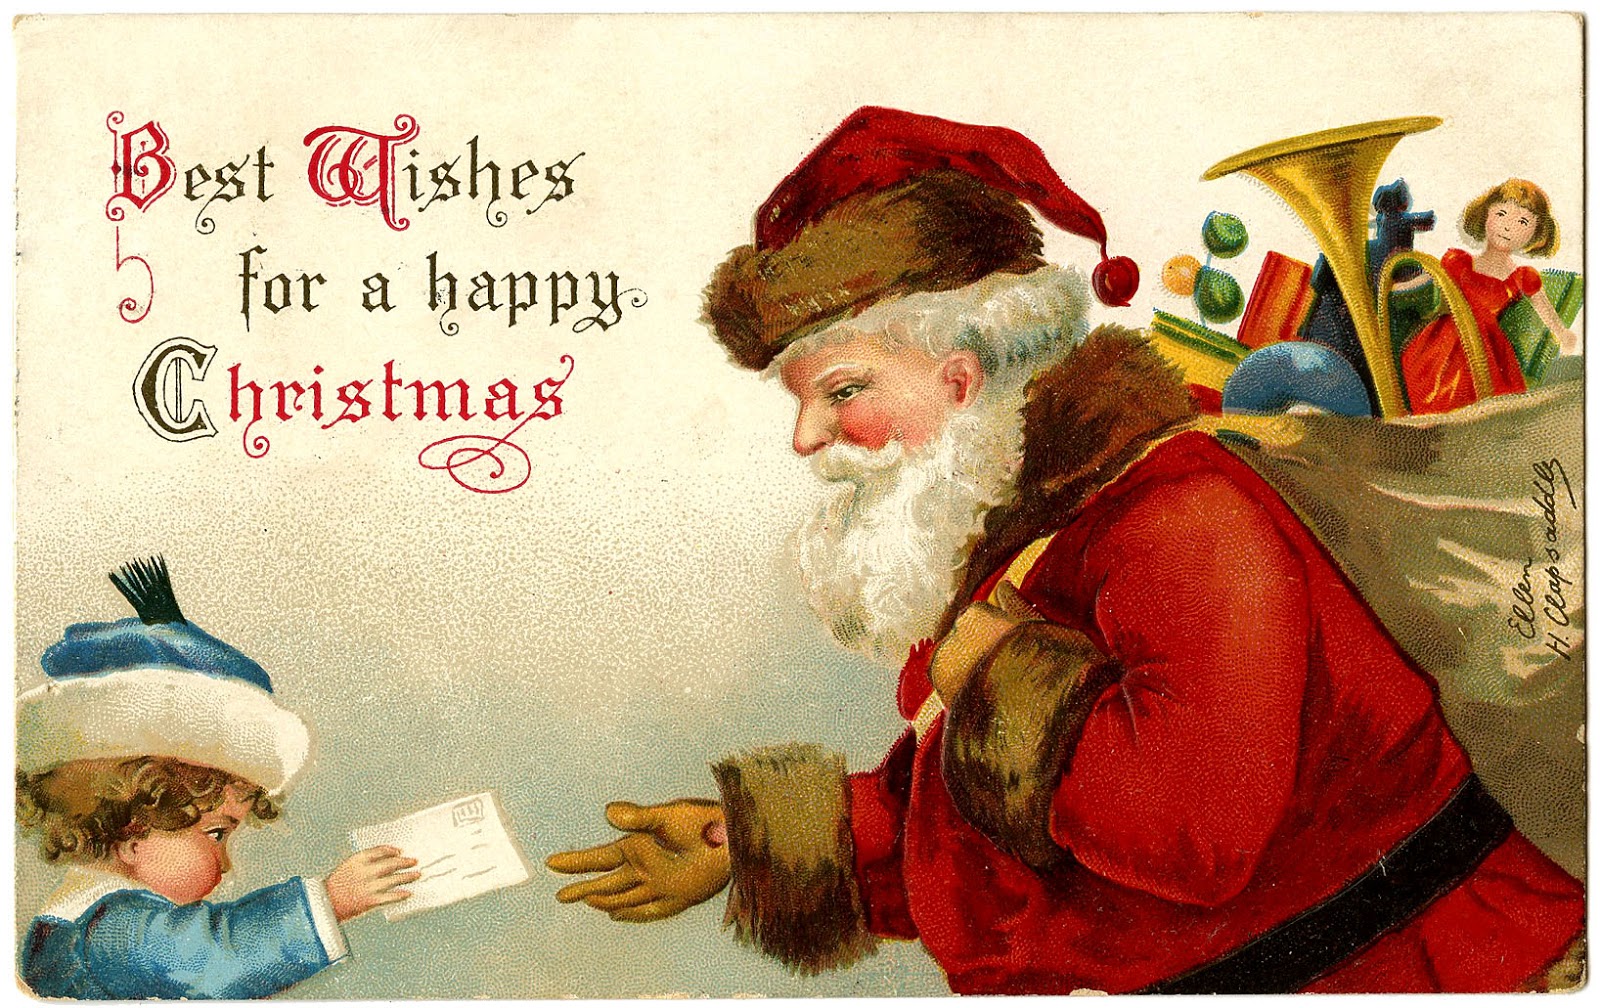 Antique Image   Santa Gets Letter From Child   The Graphics Fairy